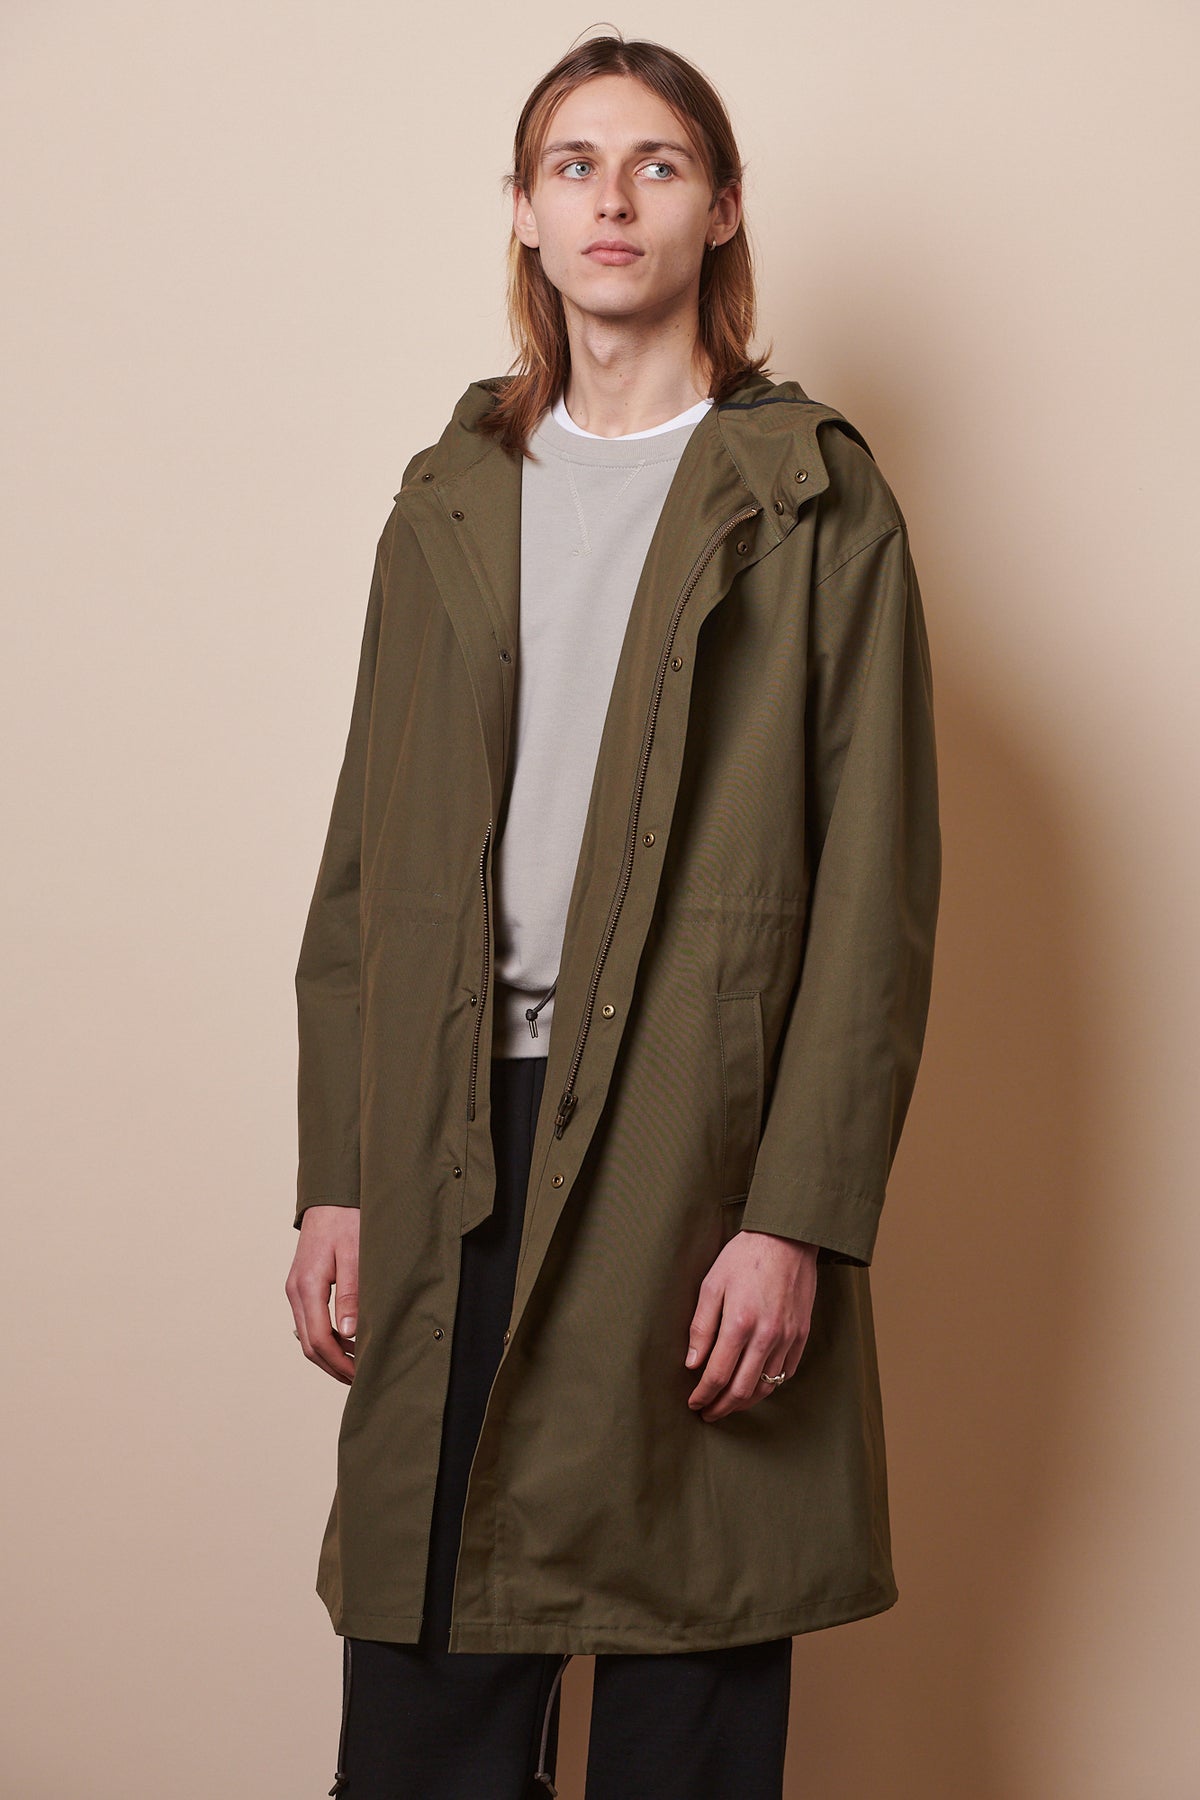 
            Knee up image of male wearing parka in olive unzipped 